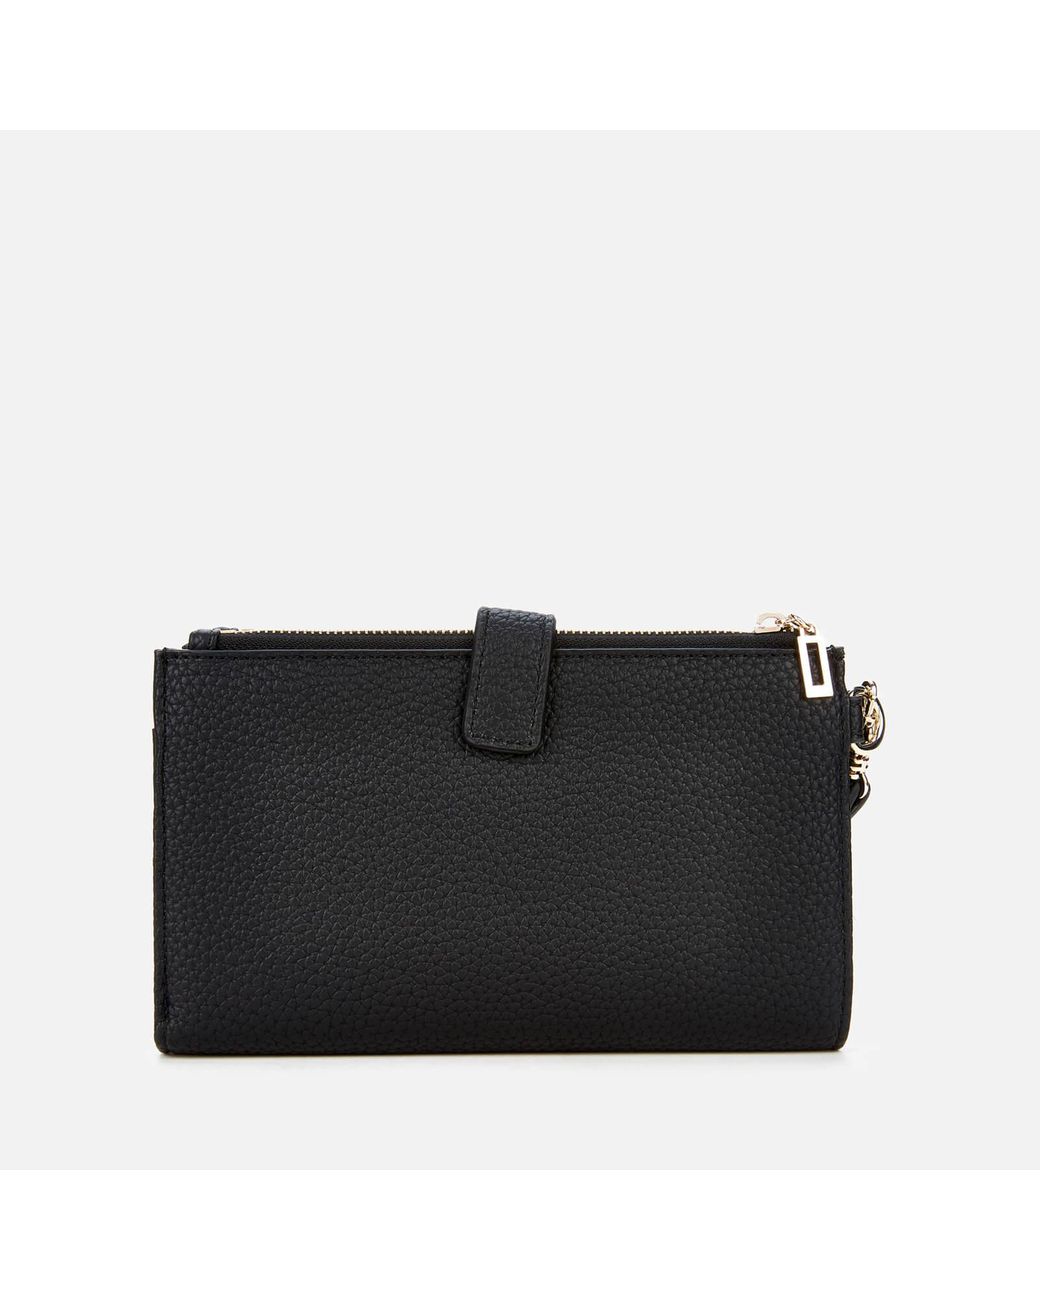 Guess Uptown Chic Double Zip Organizer Wallet in Black | Lyst Canada